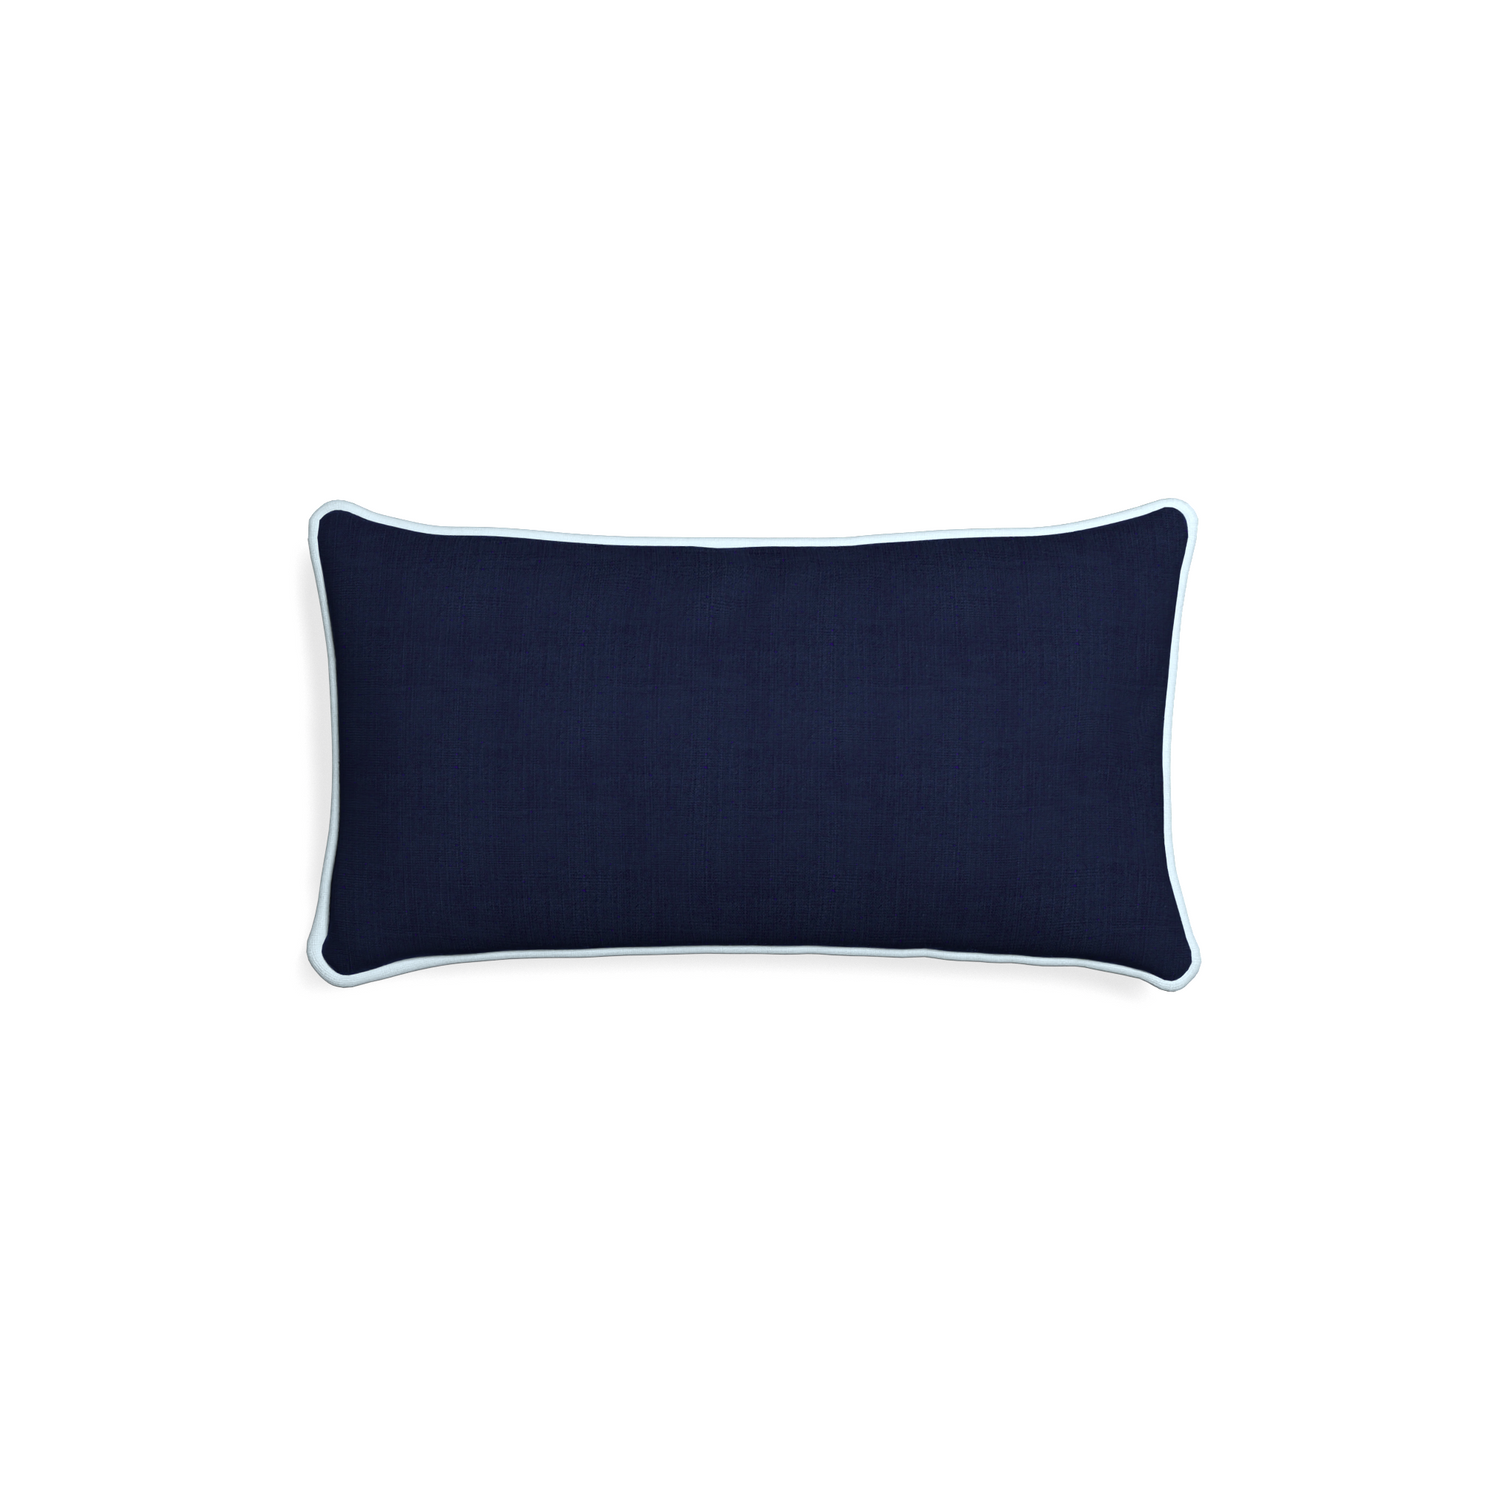 Petite-lumbar midnight custom navy bluepillow with powder piping on white background